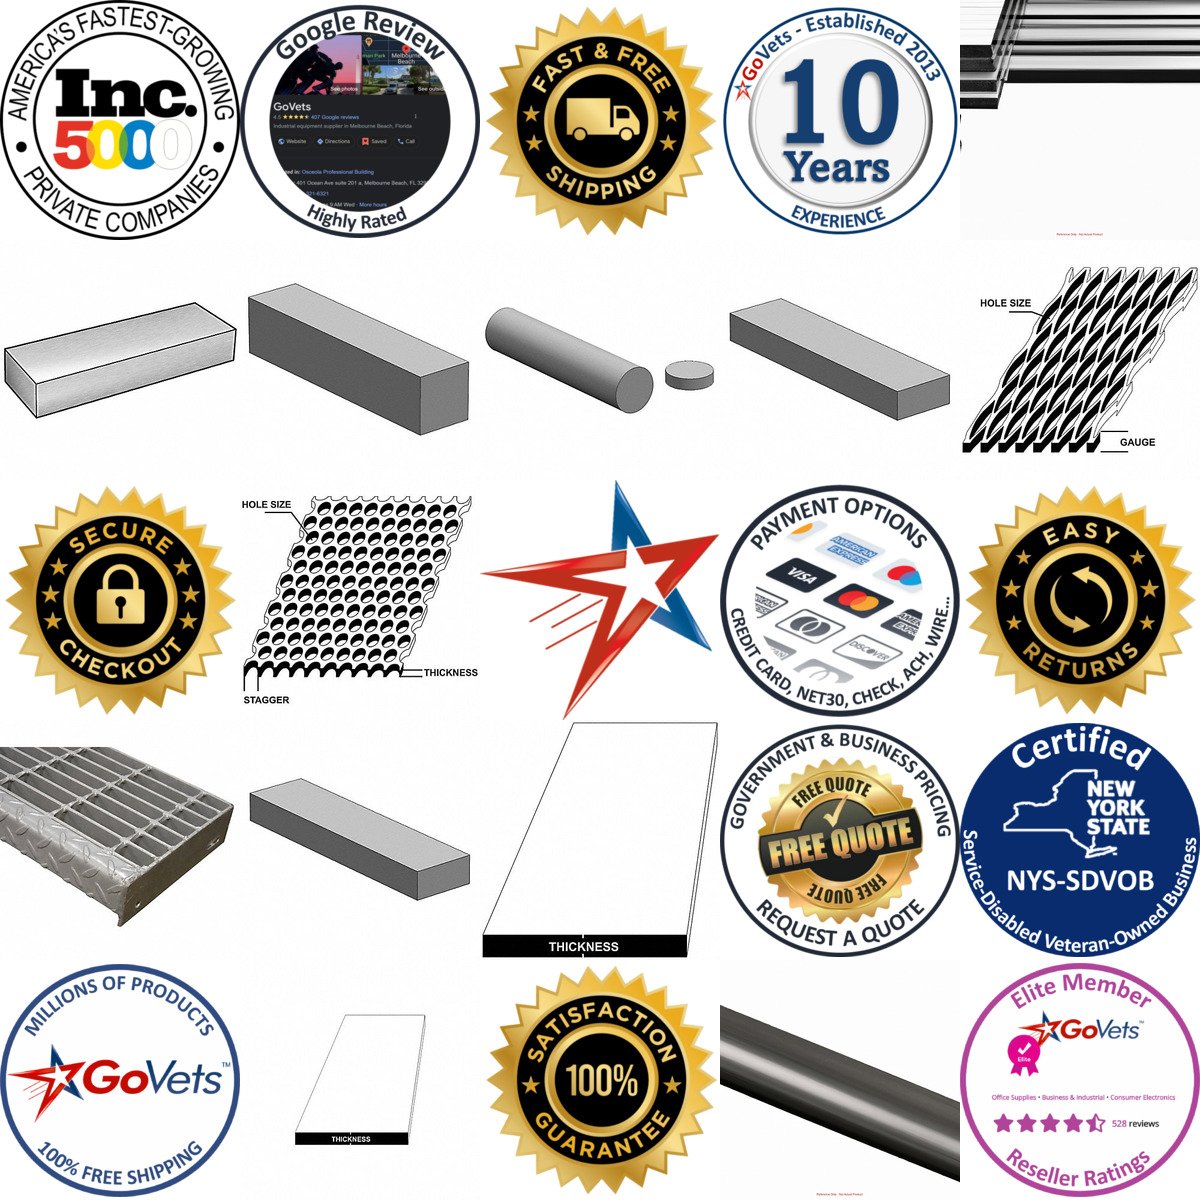 A selection of Carbon Steel products on GoVets